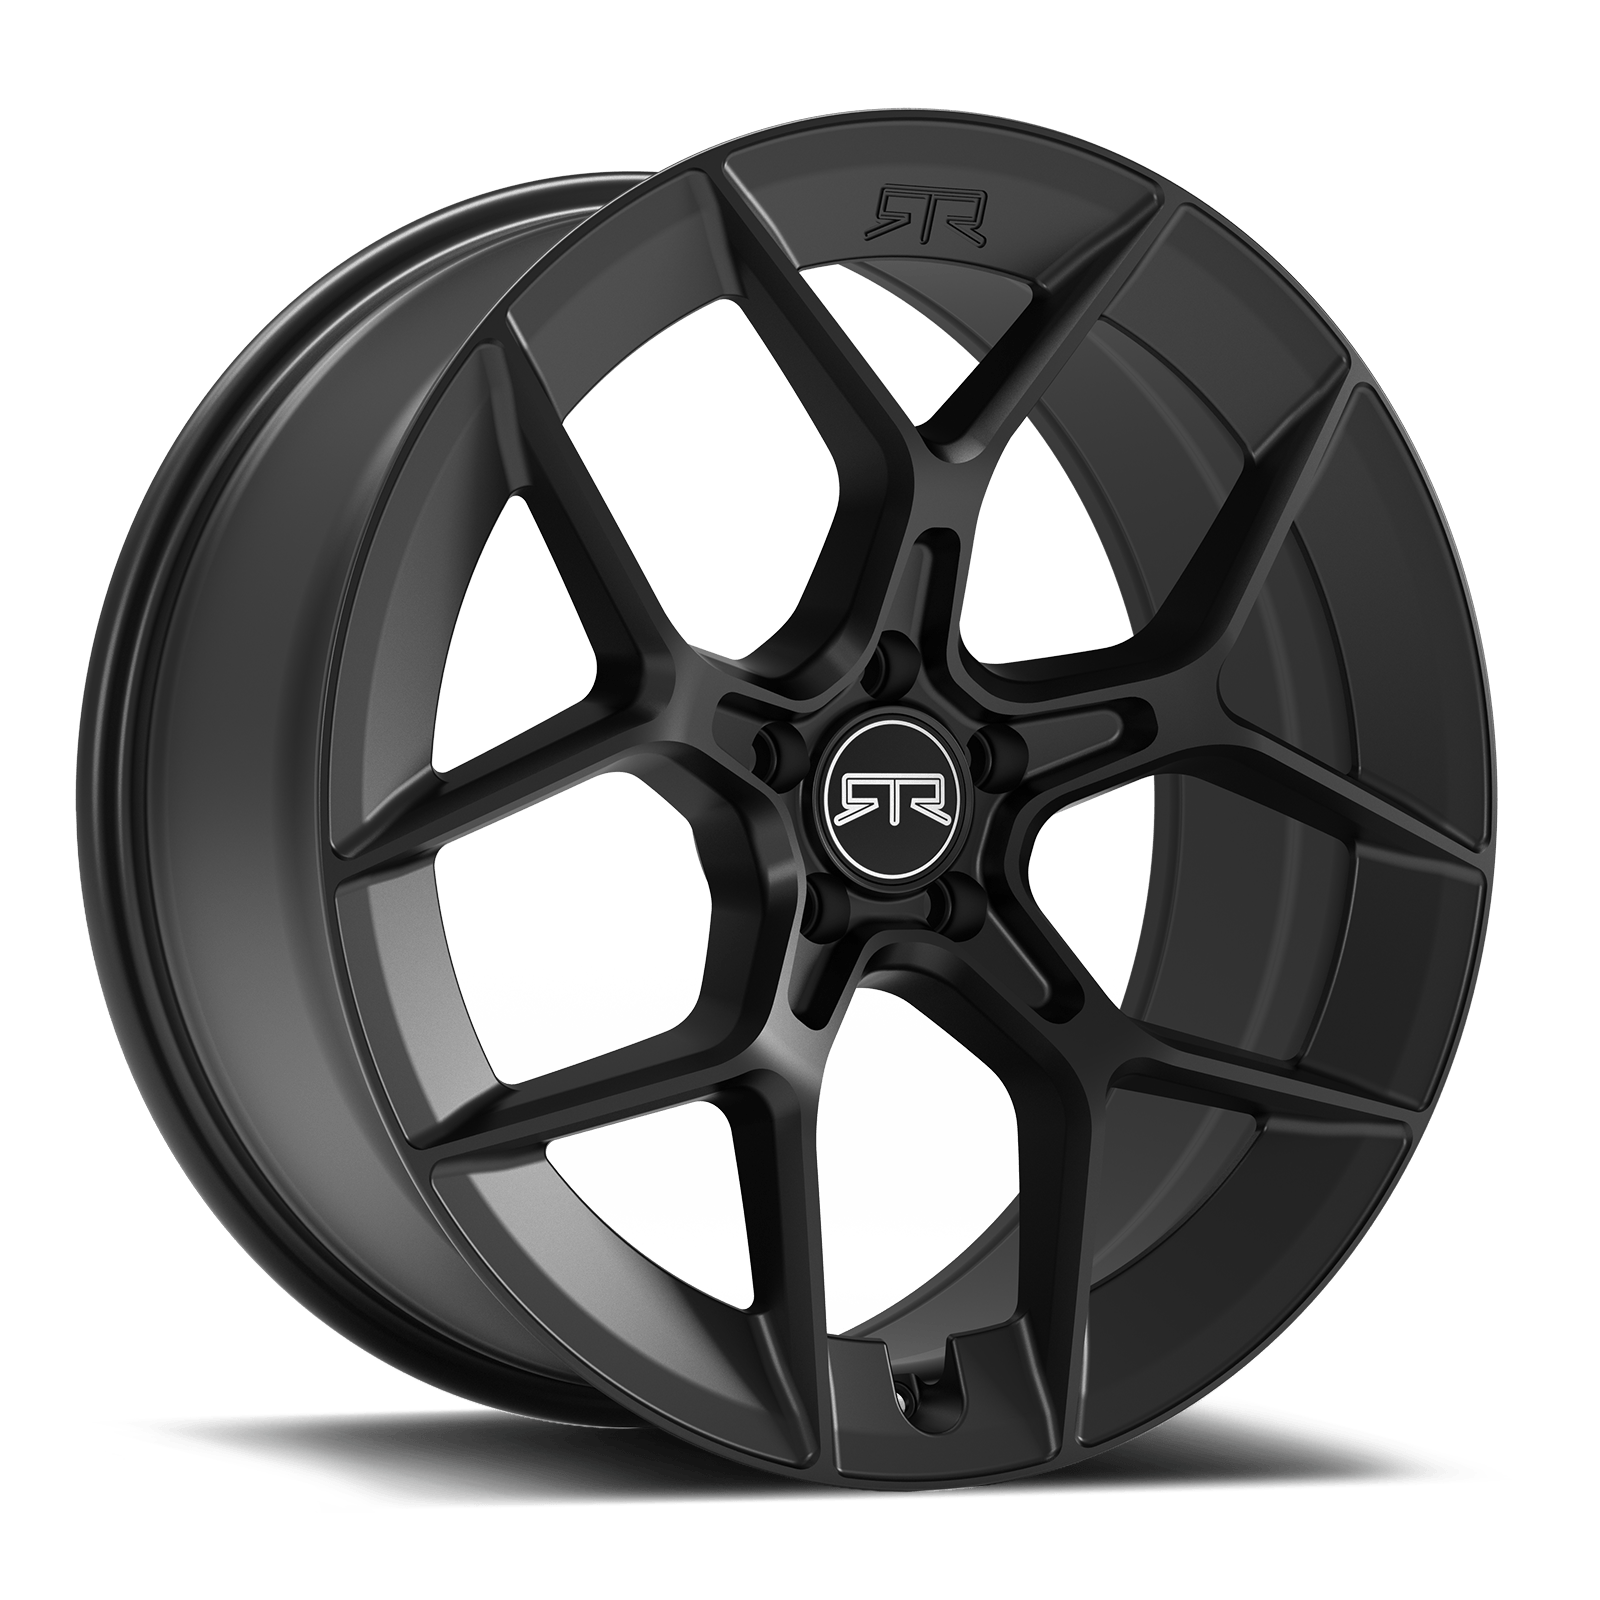 "RTR Aero 5 Mustang Mach-E Wheel | Satin Black/Satin Charcoal | 20x8.5 +31 Offset | Fits 2021+ Mustang Mach-E | Flow Forming Technology | Hub-Centric Design | Enhanced Aerodynamics | Precision Craftsmanship | Upgrade Your Mach-E's Style and Performance"